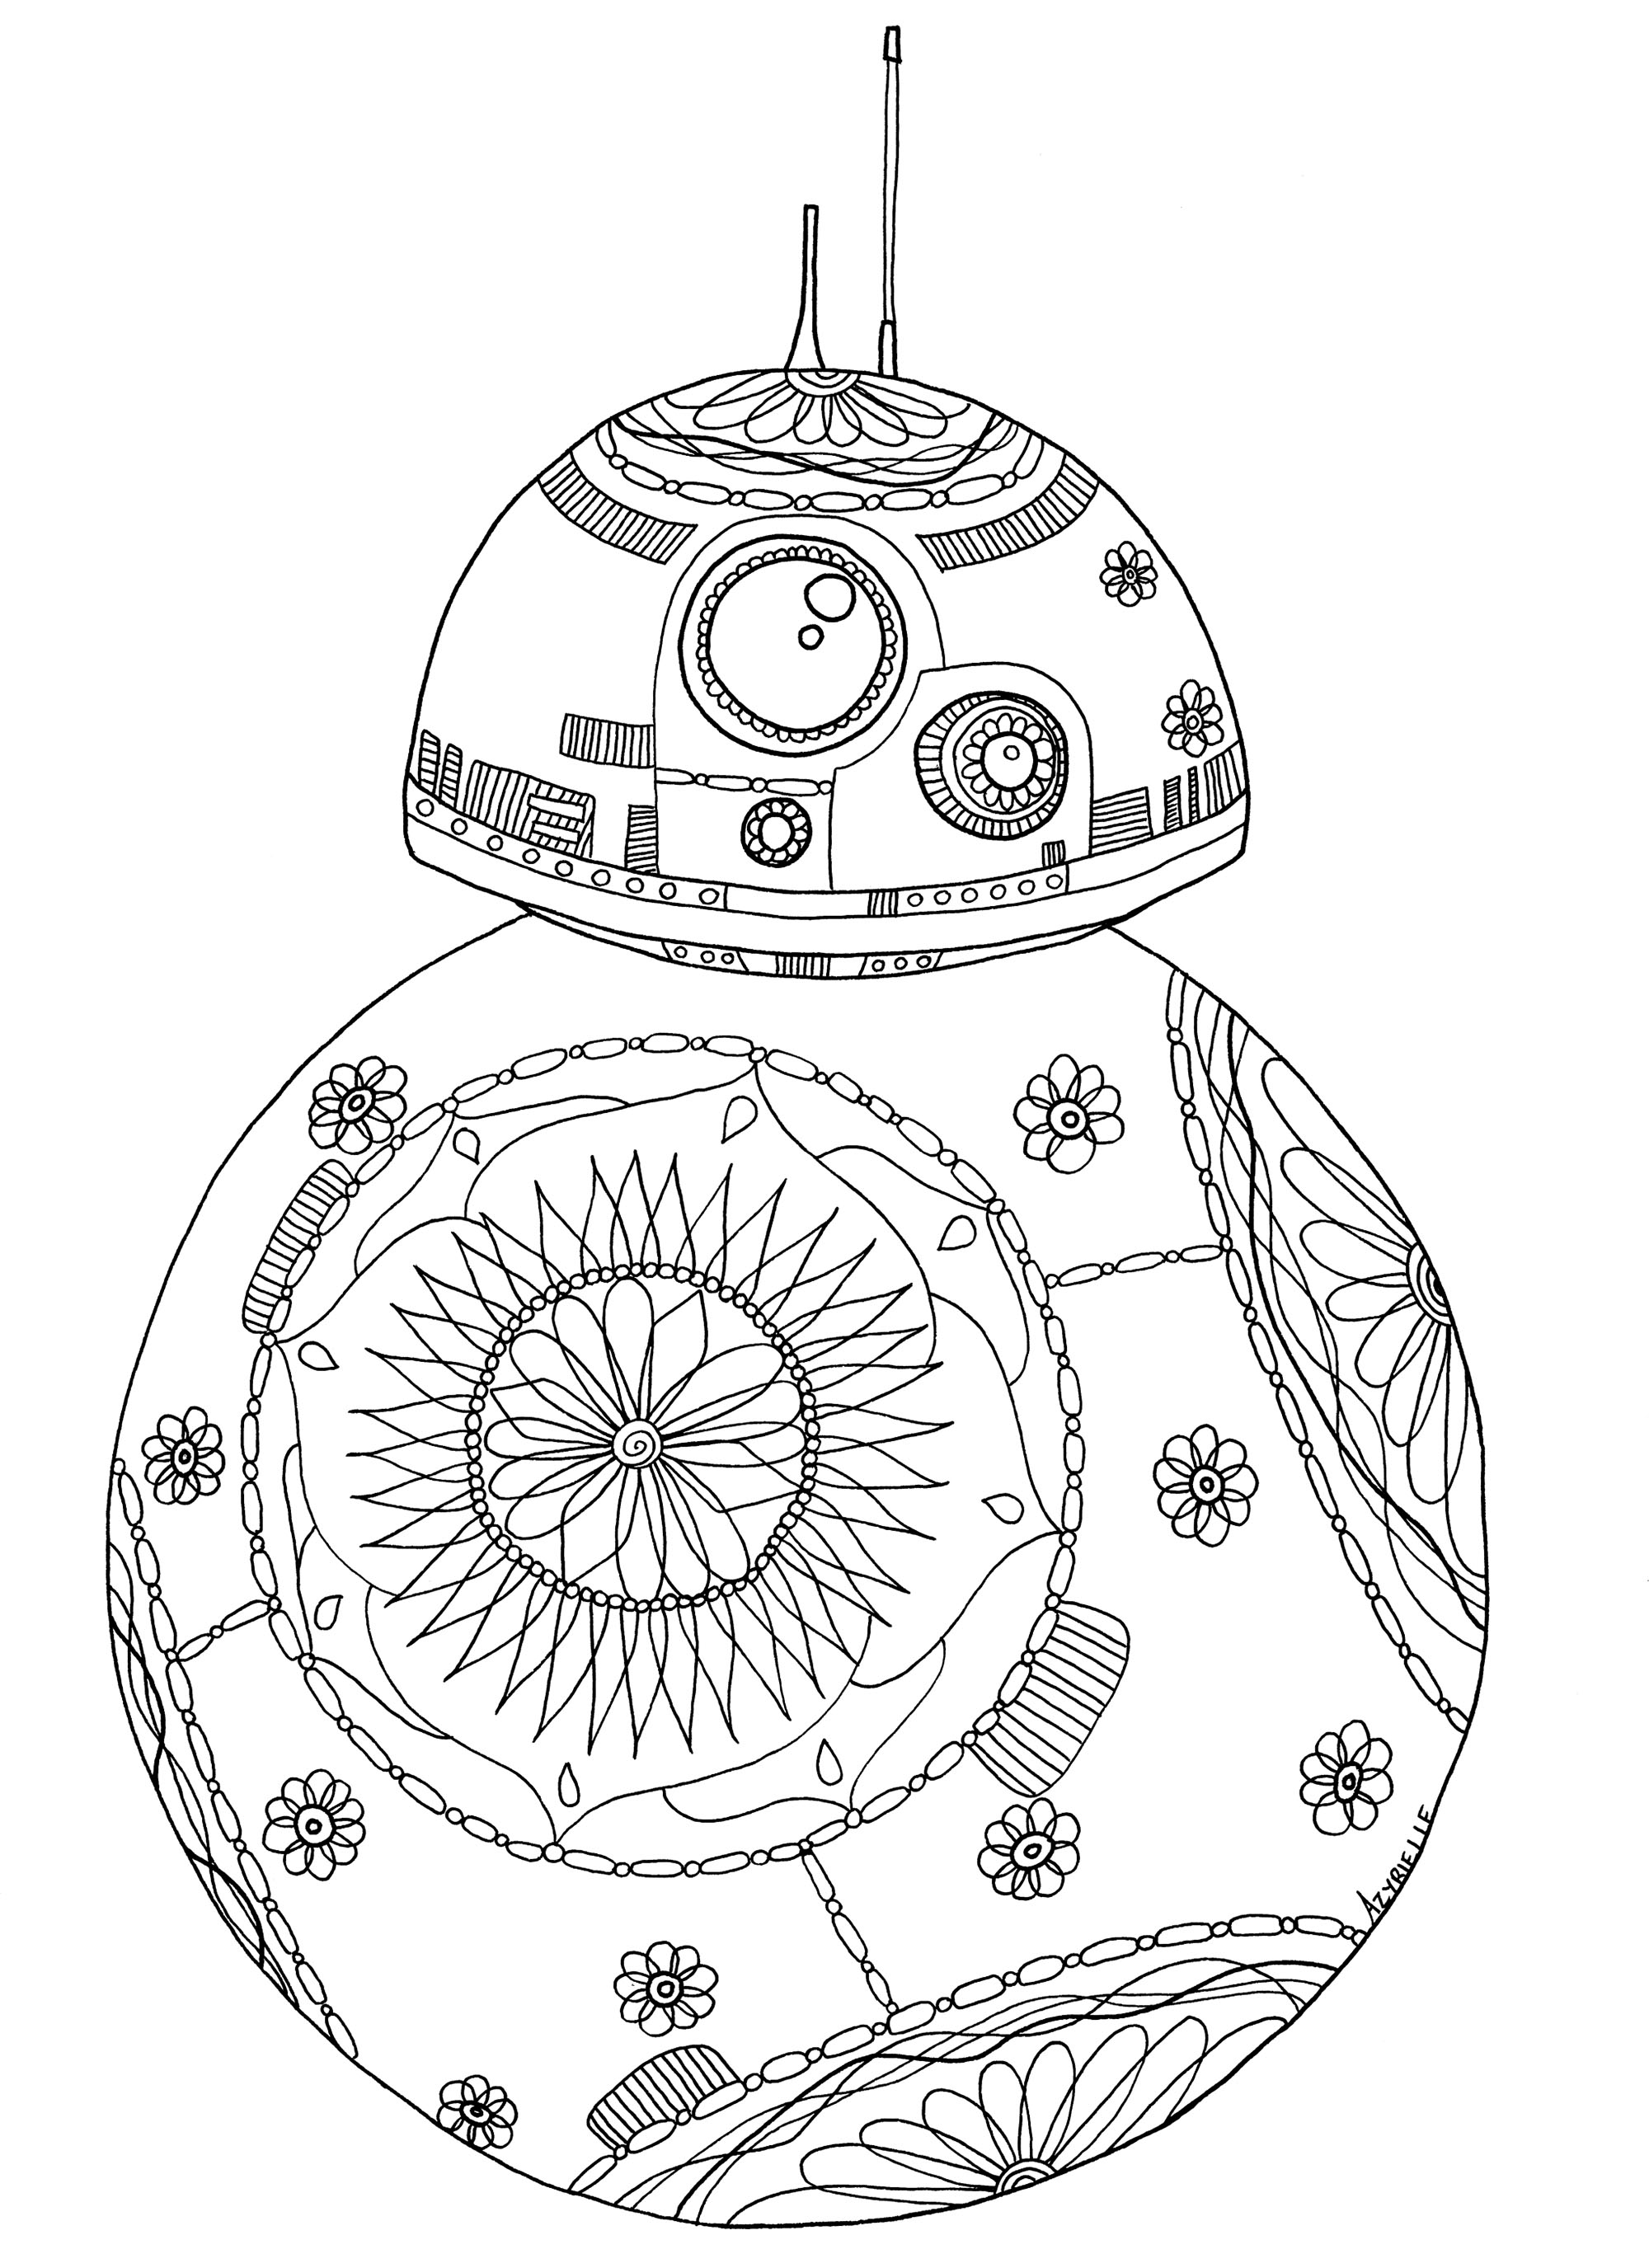 Star Wars Coloring Pages Printables FREE 2